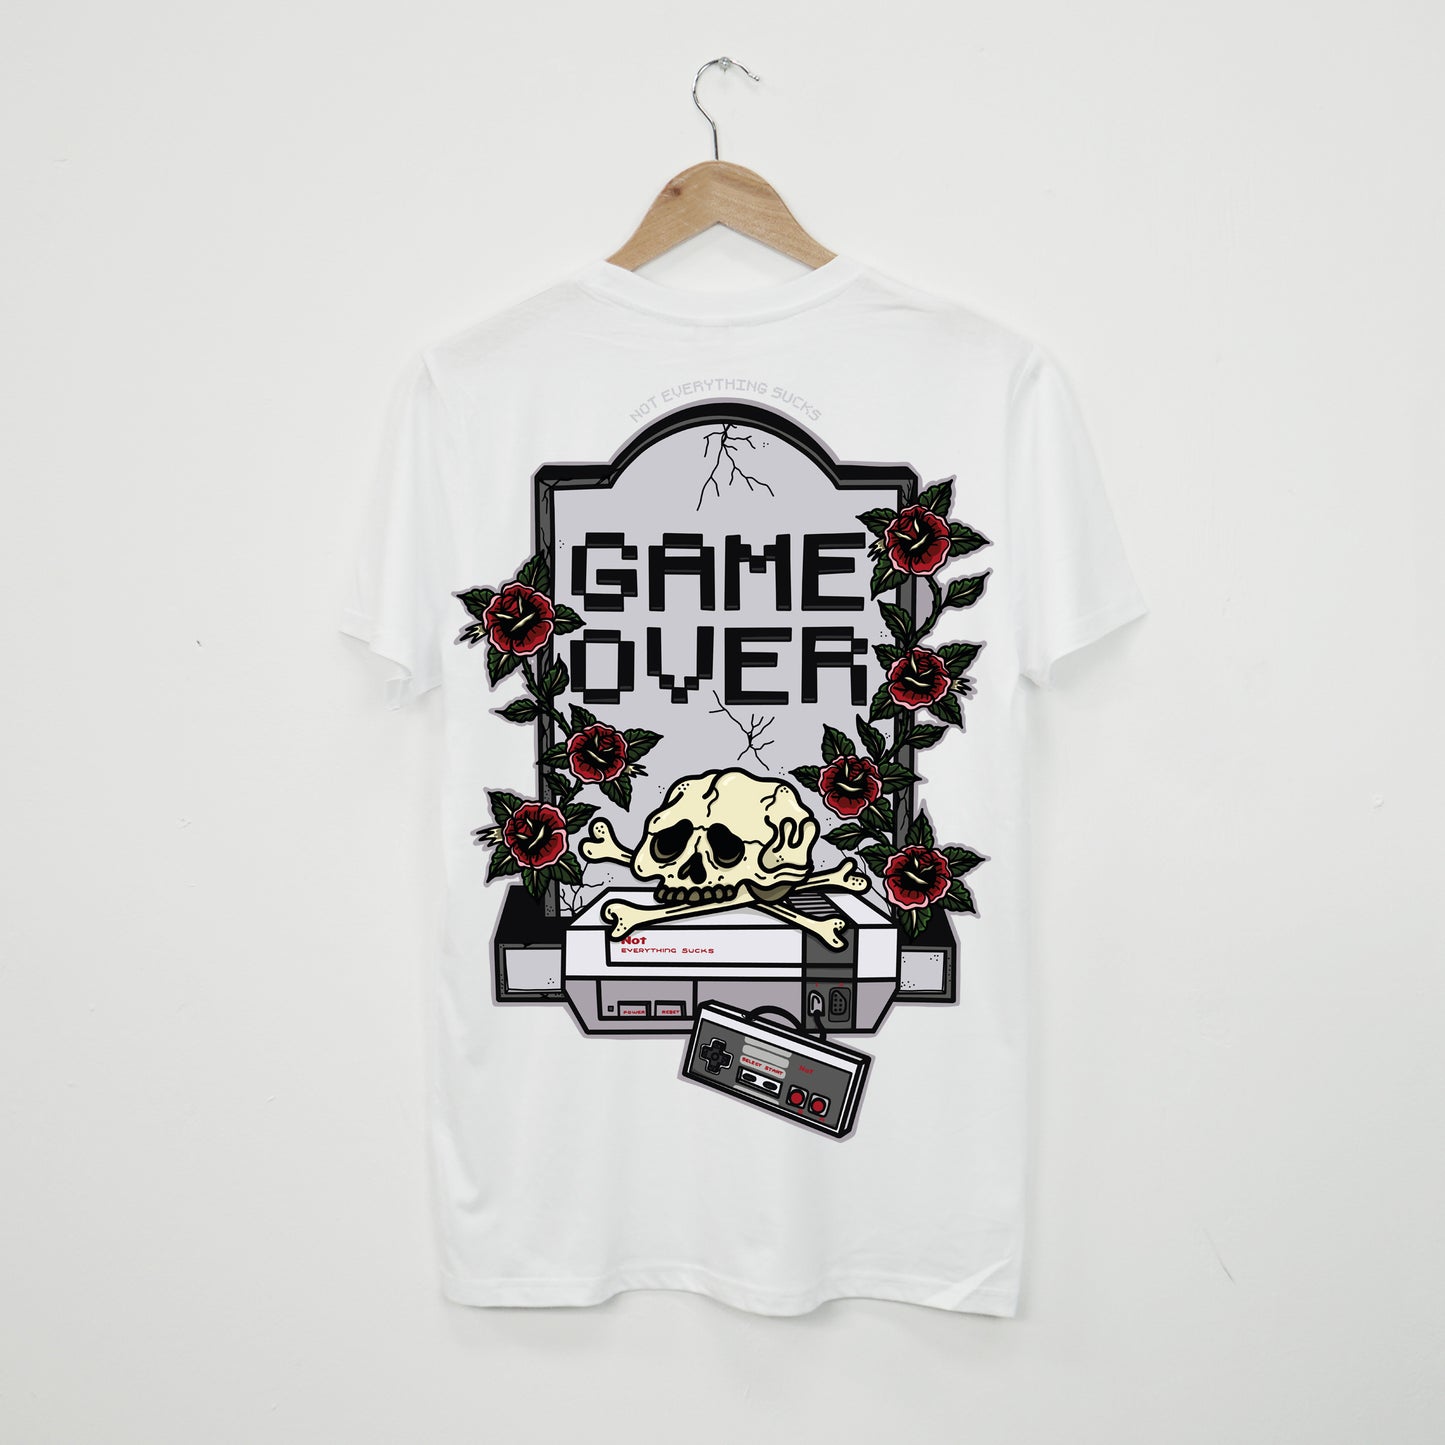 Game Over T-Shirt